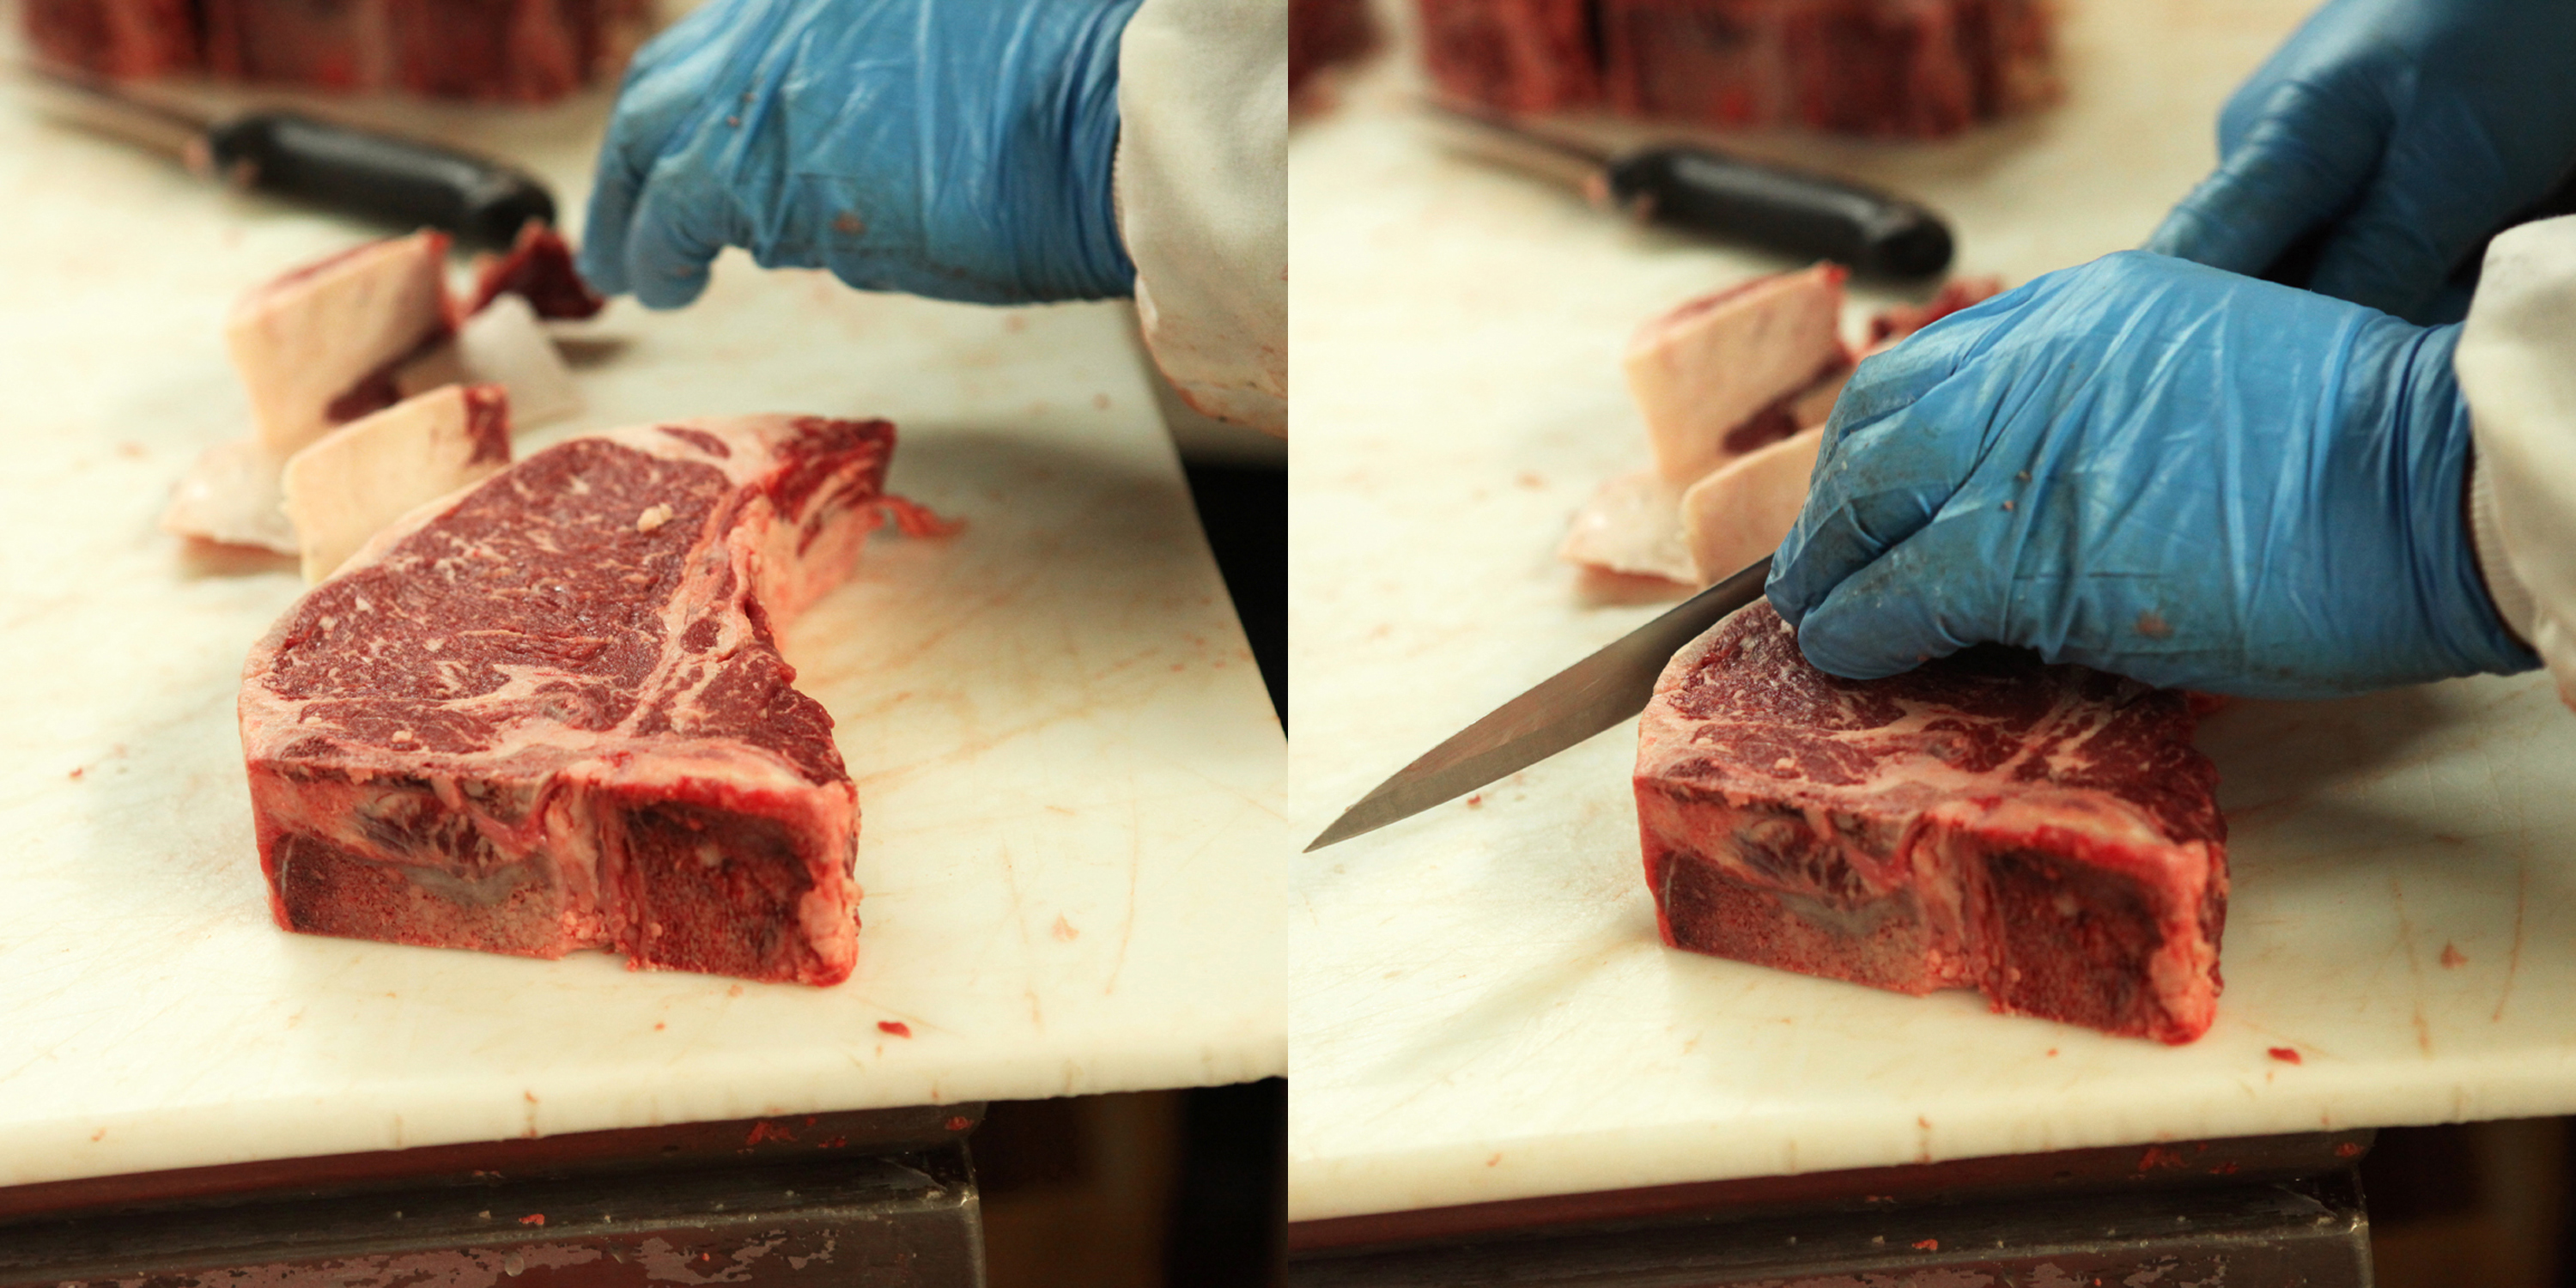 "Da Butcher" trims some of the fat off before it heads to the sealer